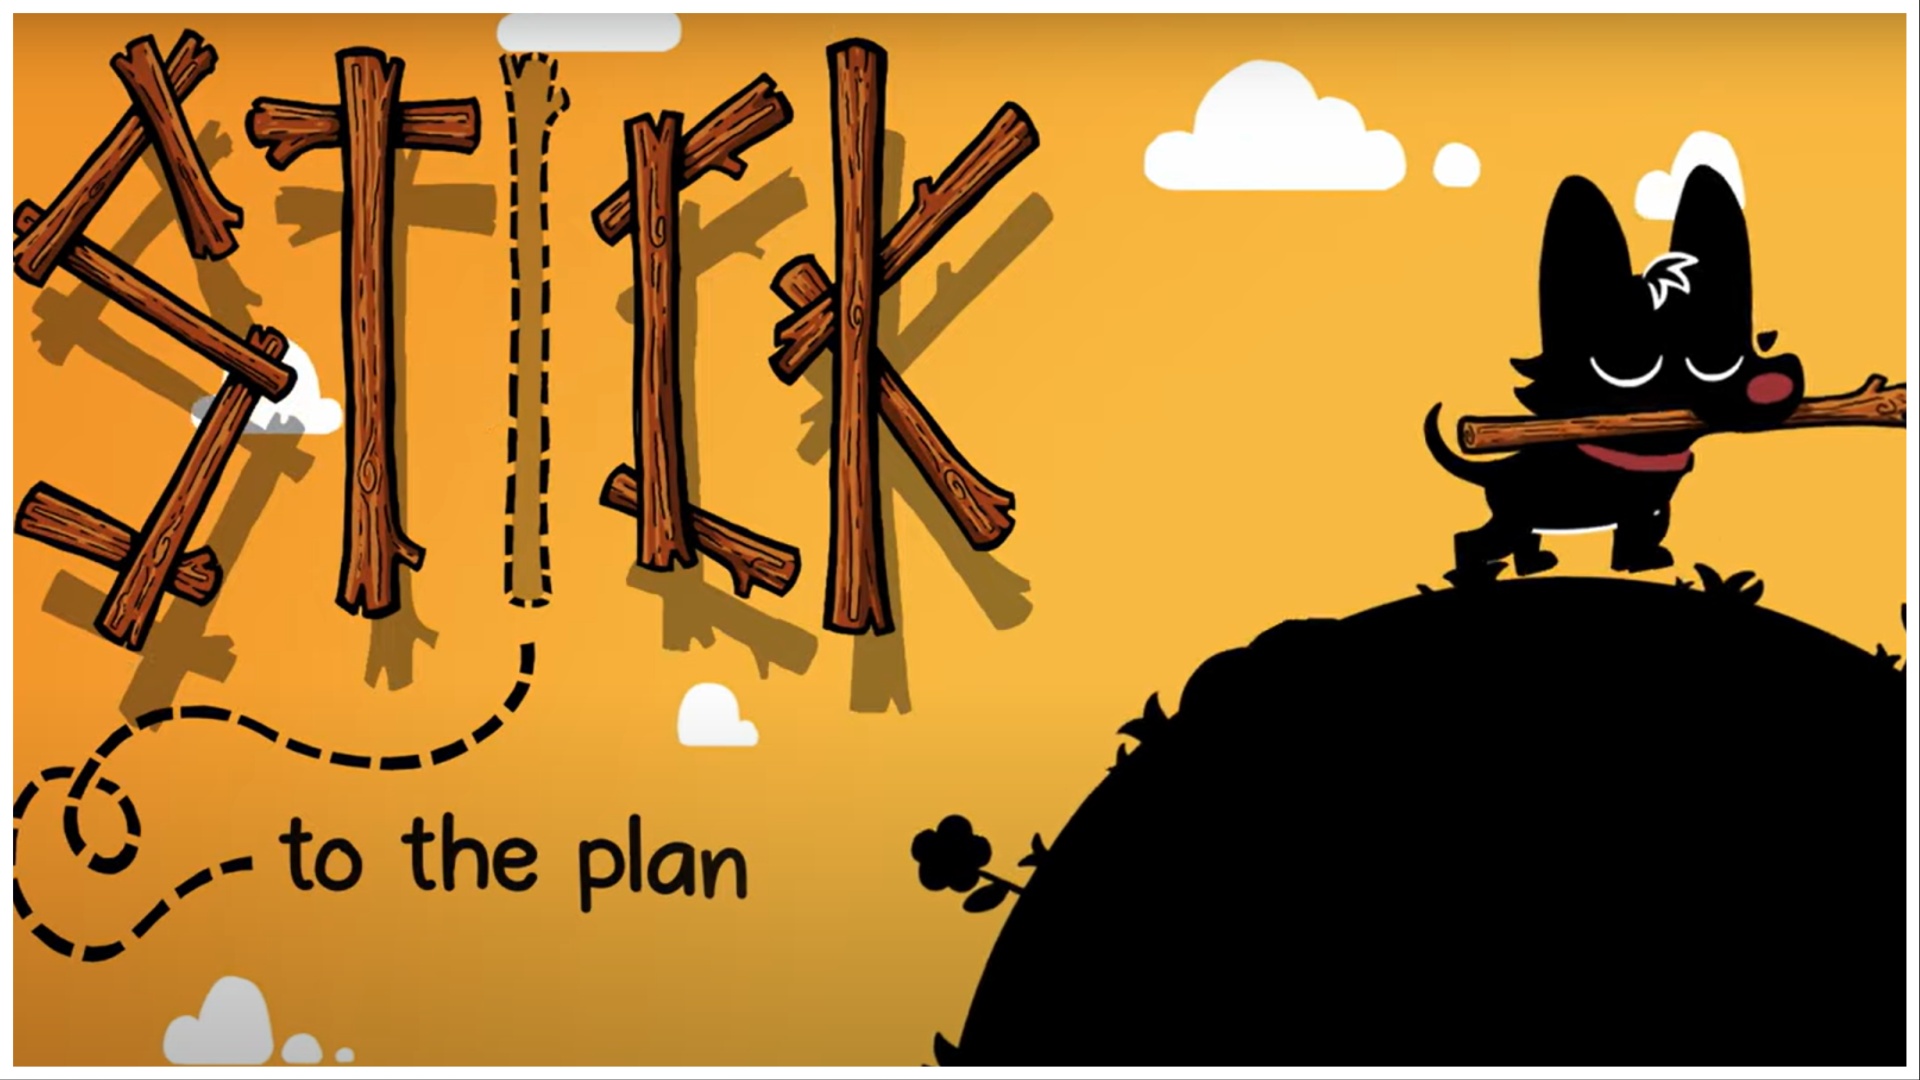 Stick to the Plan Reimagines The Cool Maths Games Bloxorz Game!